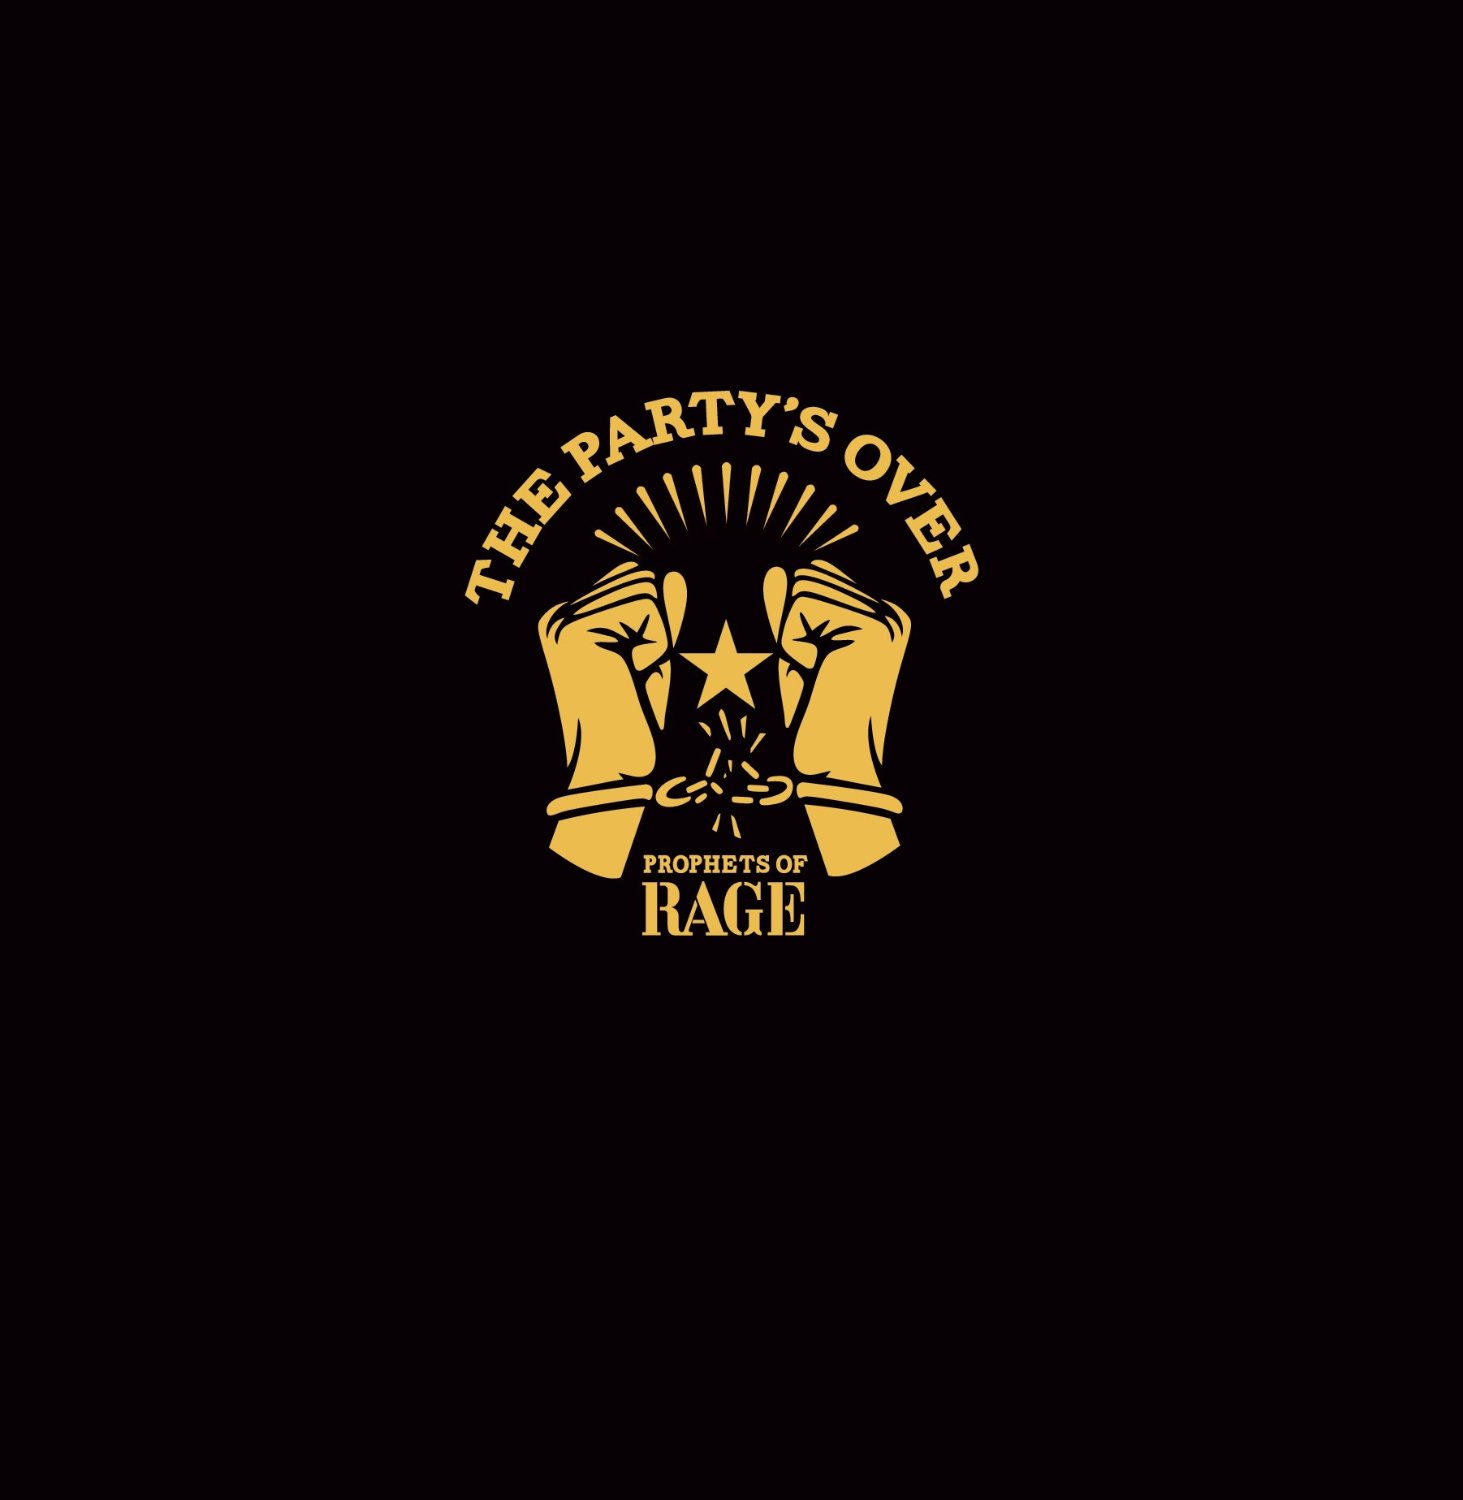 PROPHETS OF RAGE (ROCK) / プロフェッツ・オブ・レイジ (ロック) / THE PARTY'S OVER EP